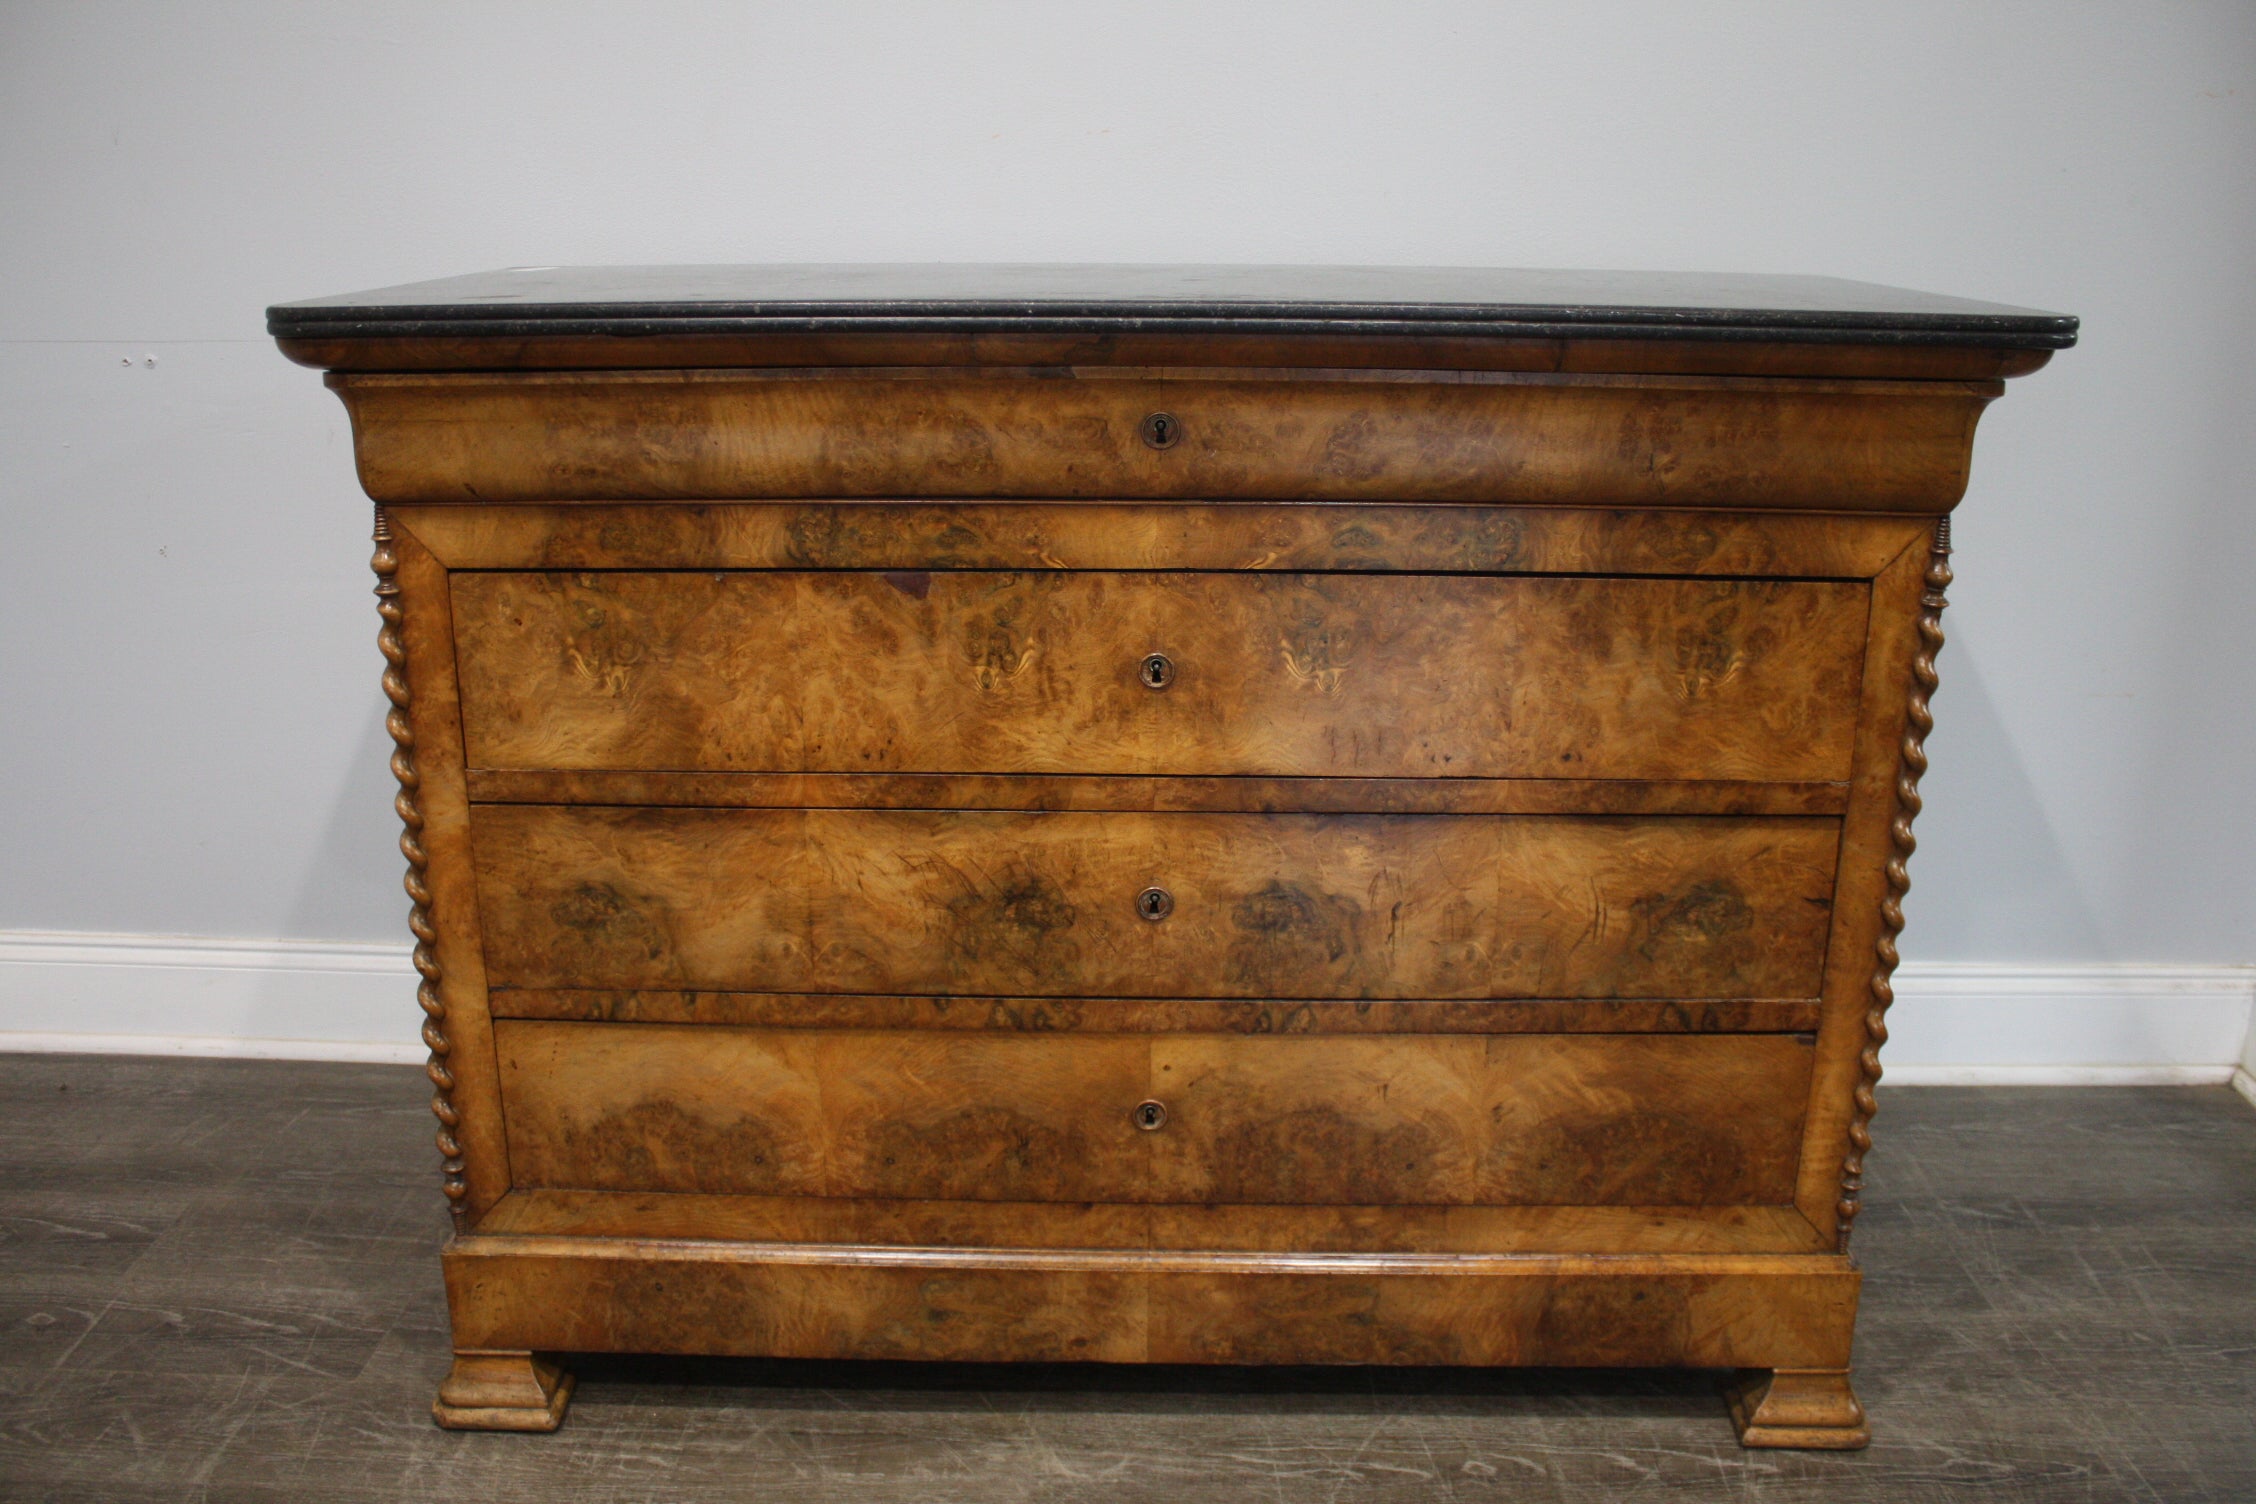 This beautiful Commode is made of burl of walnut with its original marble top, 4 drawers. On each side it has some twisted carving wood, very unusual.
A pleasure for the eyes.